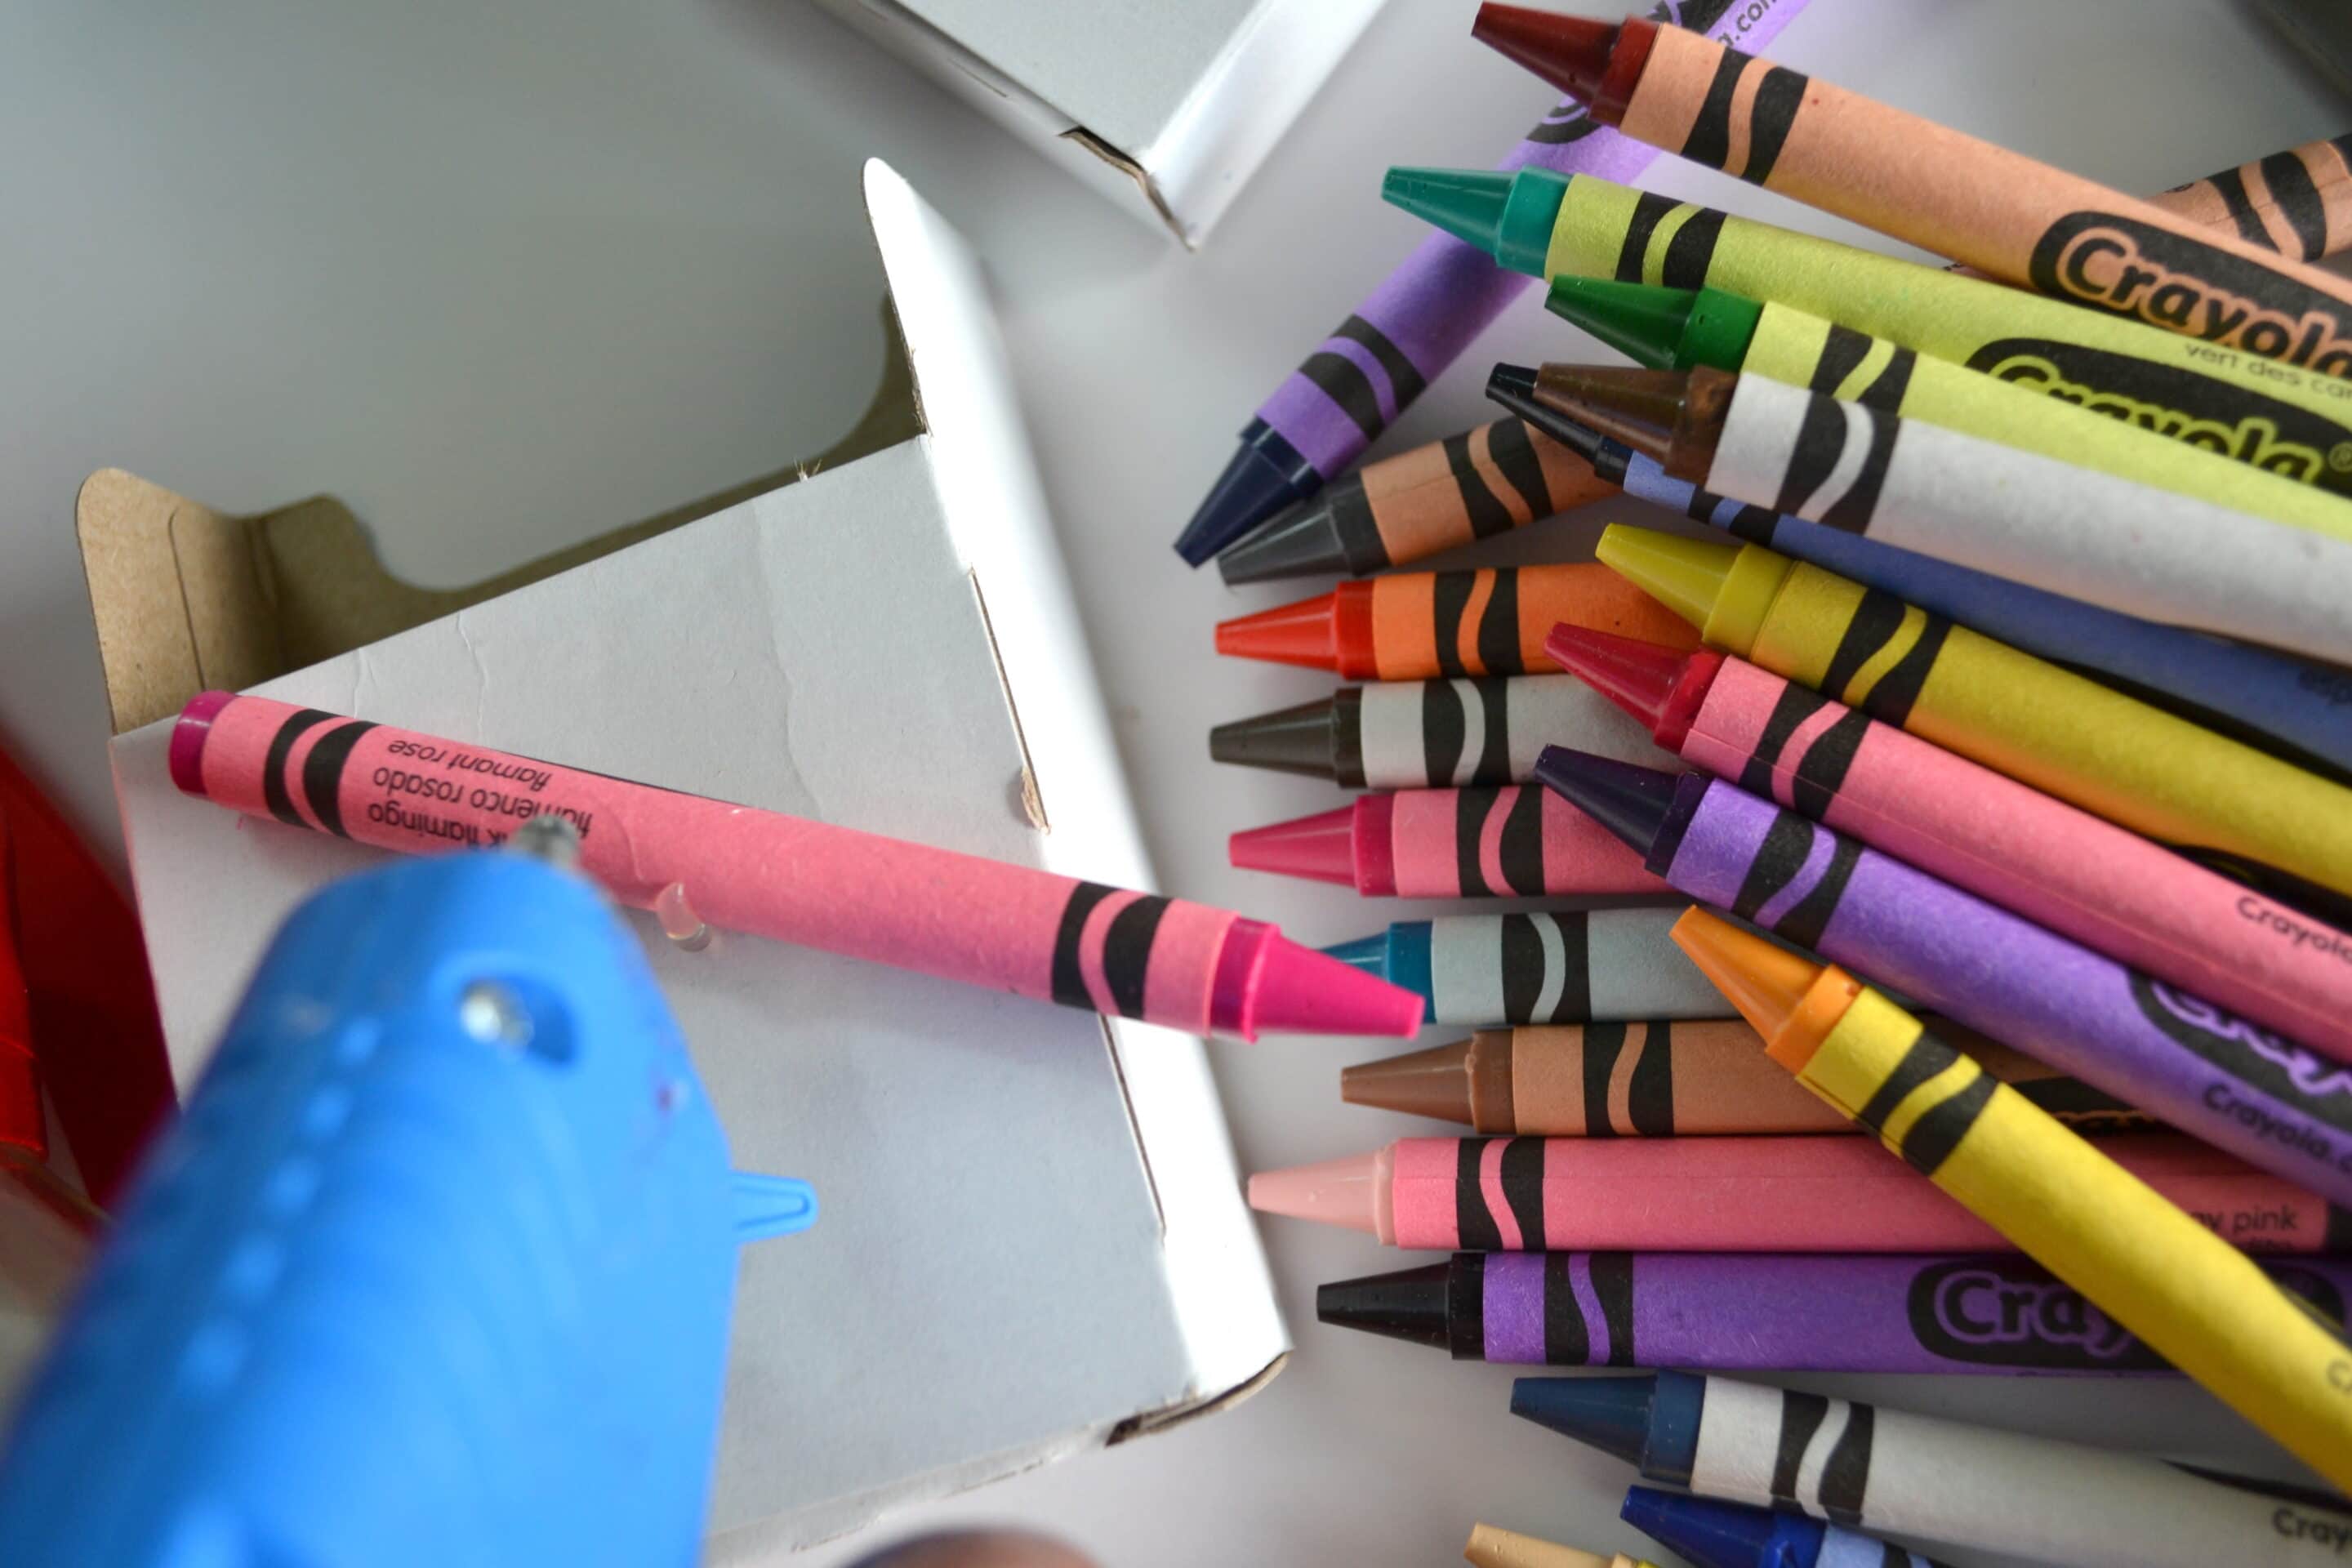 A Unique Teacher Appreciation Gift With Crayons - MommySnippets (18)